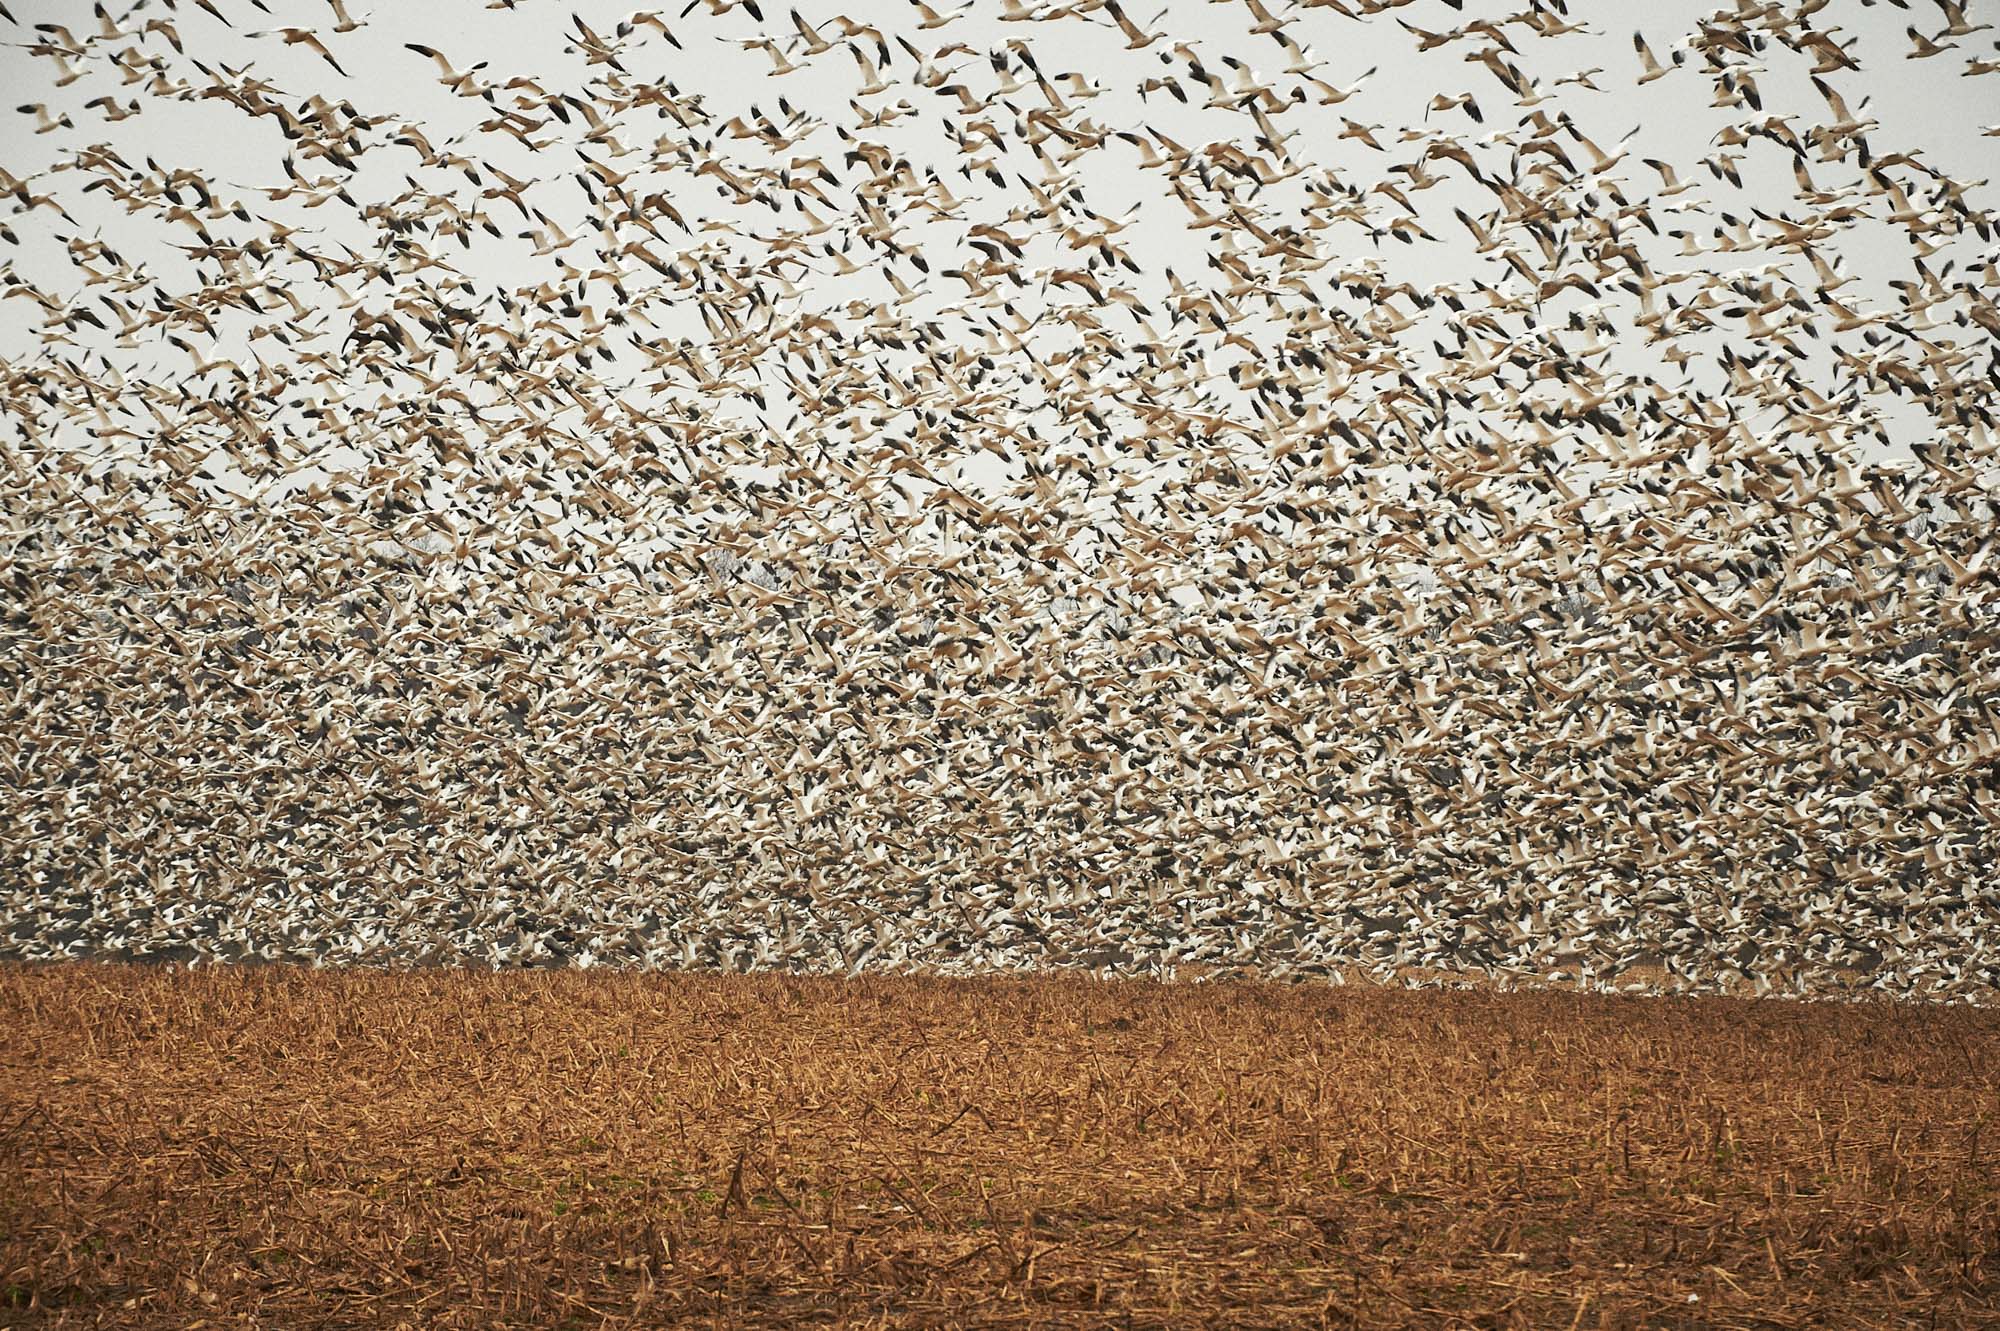 mike-carroll-photo-Open-Spaces-SnowGeese__0159